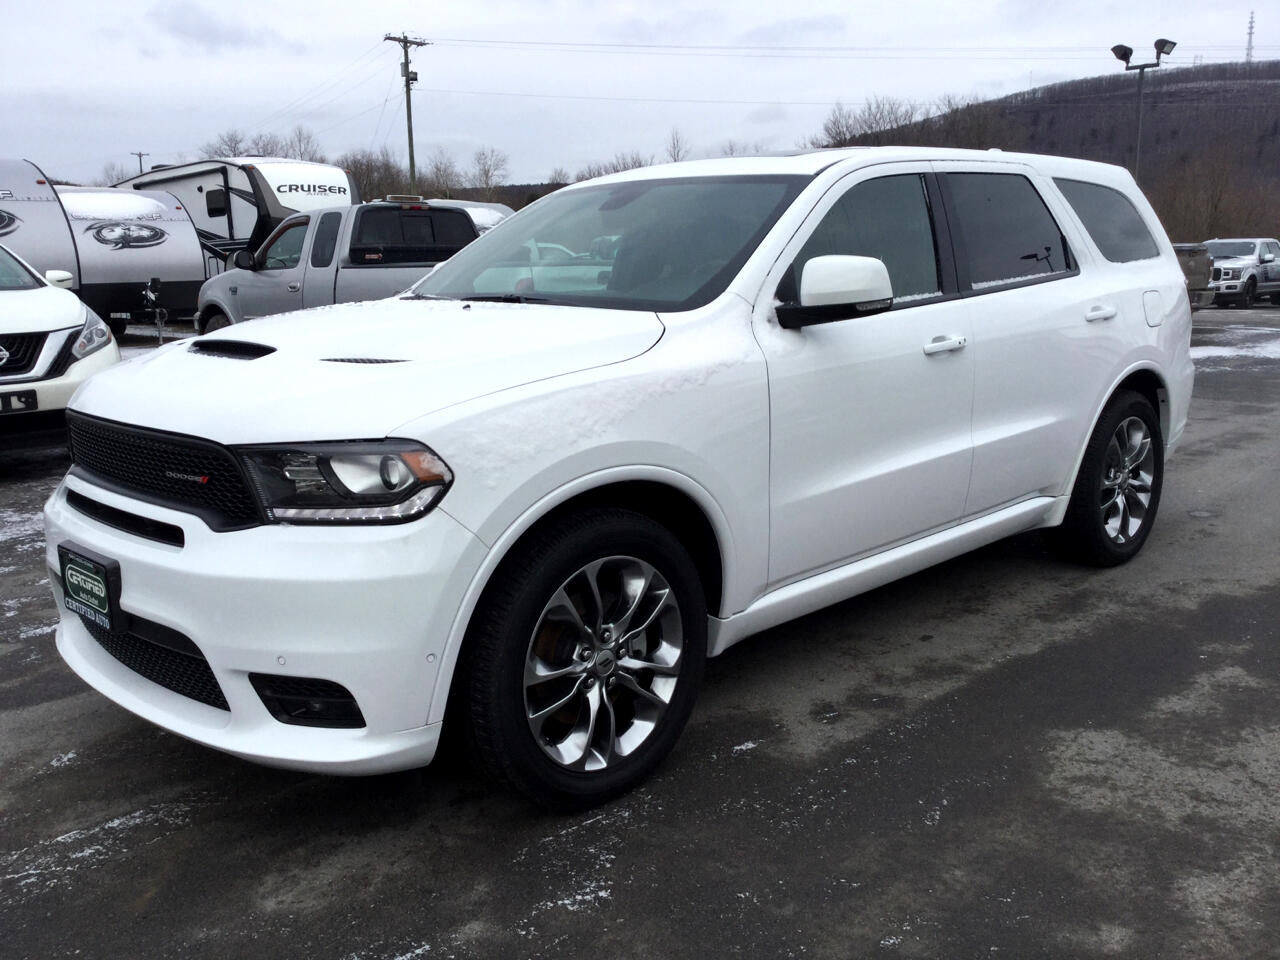 Used 2019 Dodge Durango R T Awd For Sale In Oneonta Ny 13820